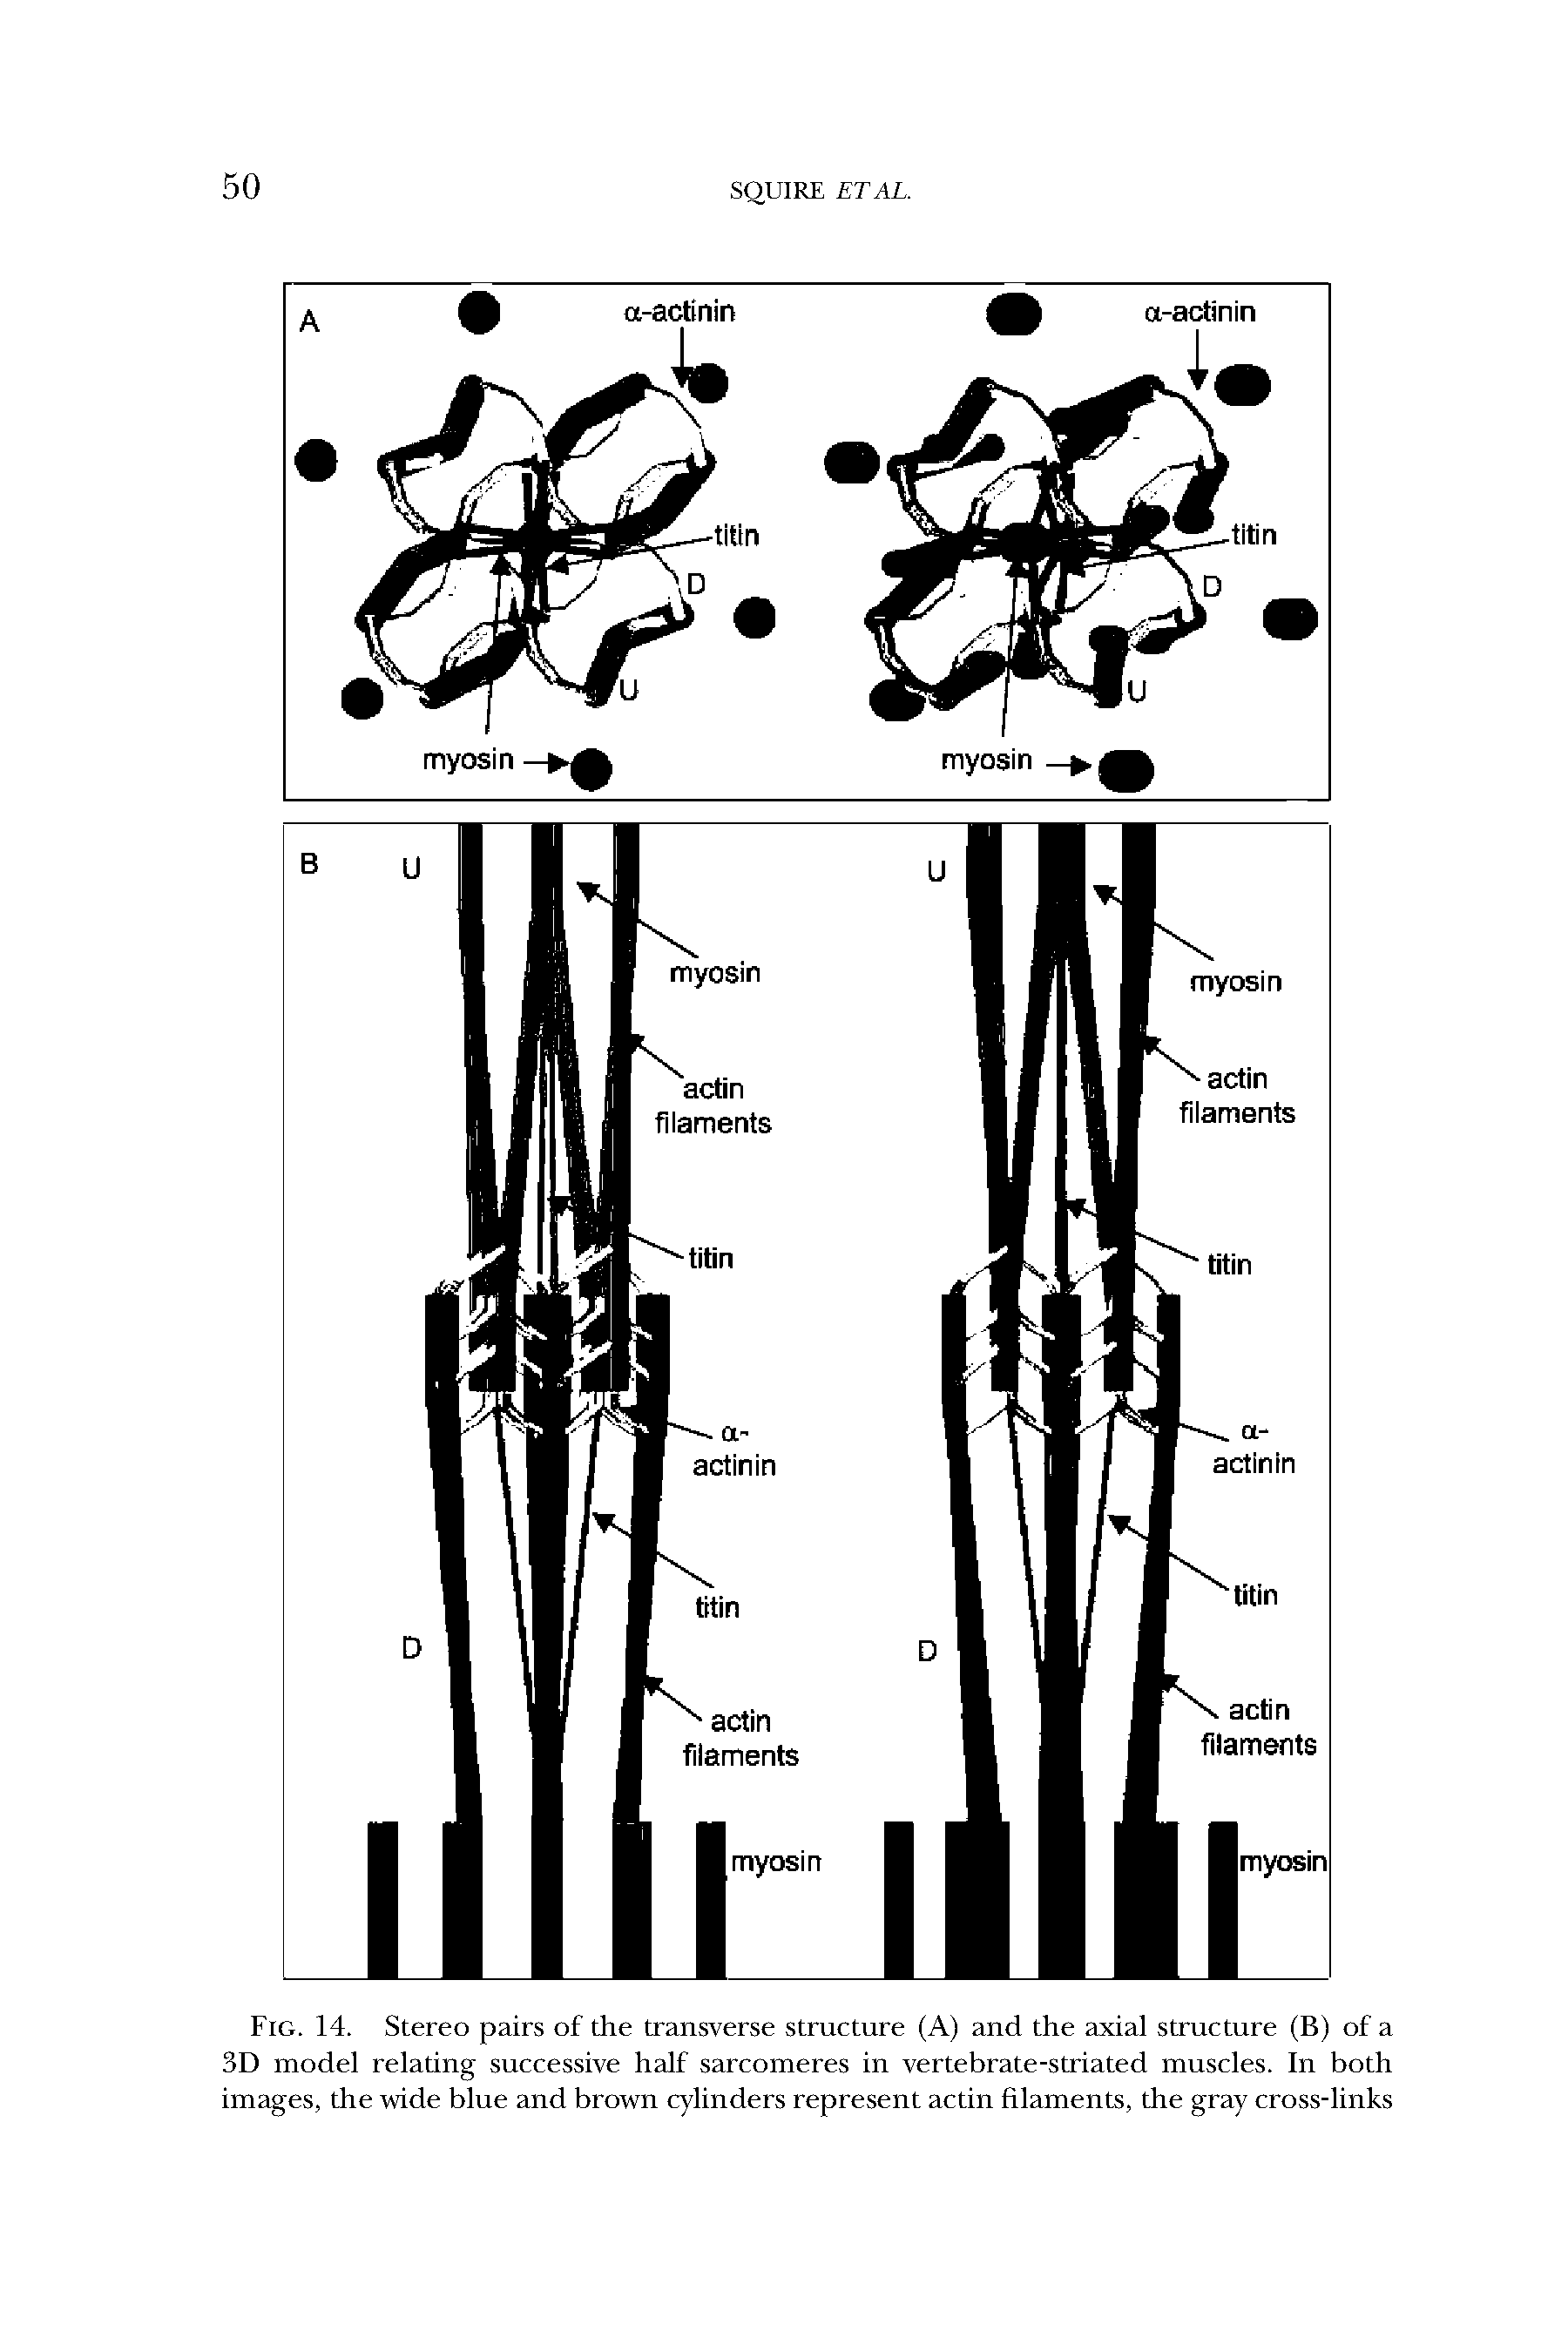 Fig. 14. Stereo pairs of the transverse structure (A) and the axial structure (B) of a 3D model relating successive half sarcomeres in vertebrate-striated muscles. In both images, the wide blue and brown cylinders represent actin filaments, the gray cross-links...